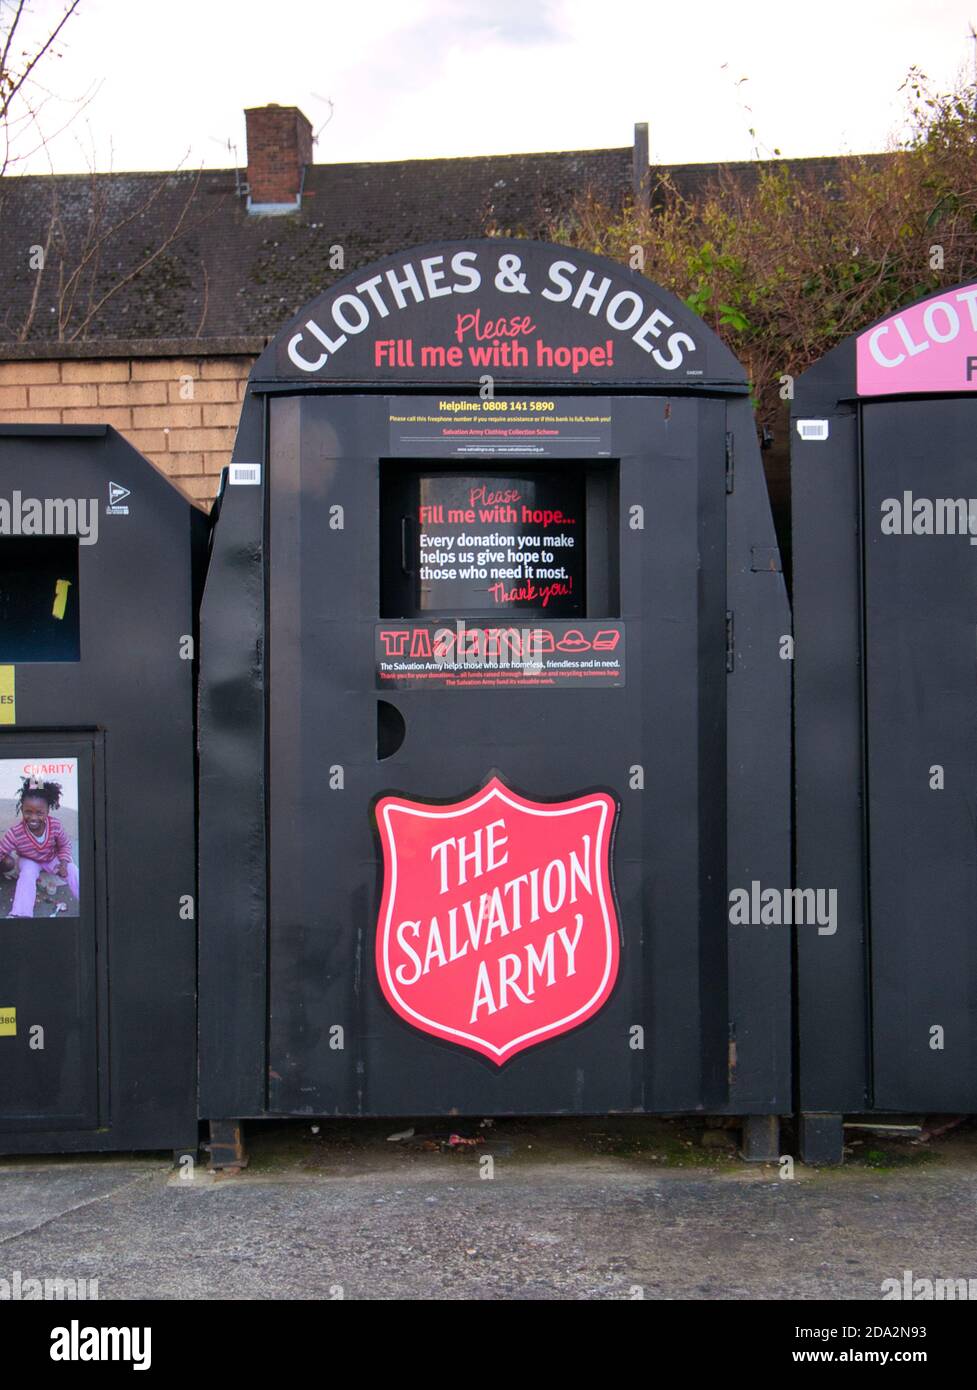 A Salvation Army collection point for donations of clothing and shoes for those in need. Stock Photo